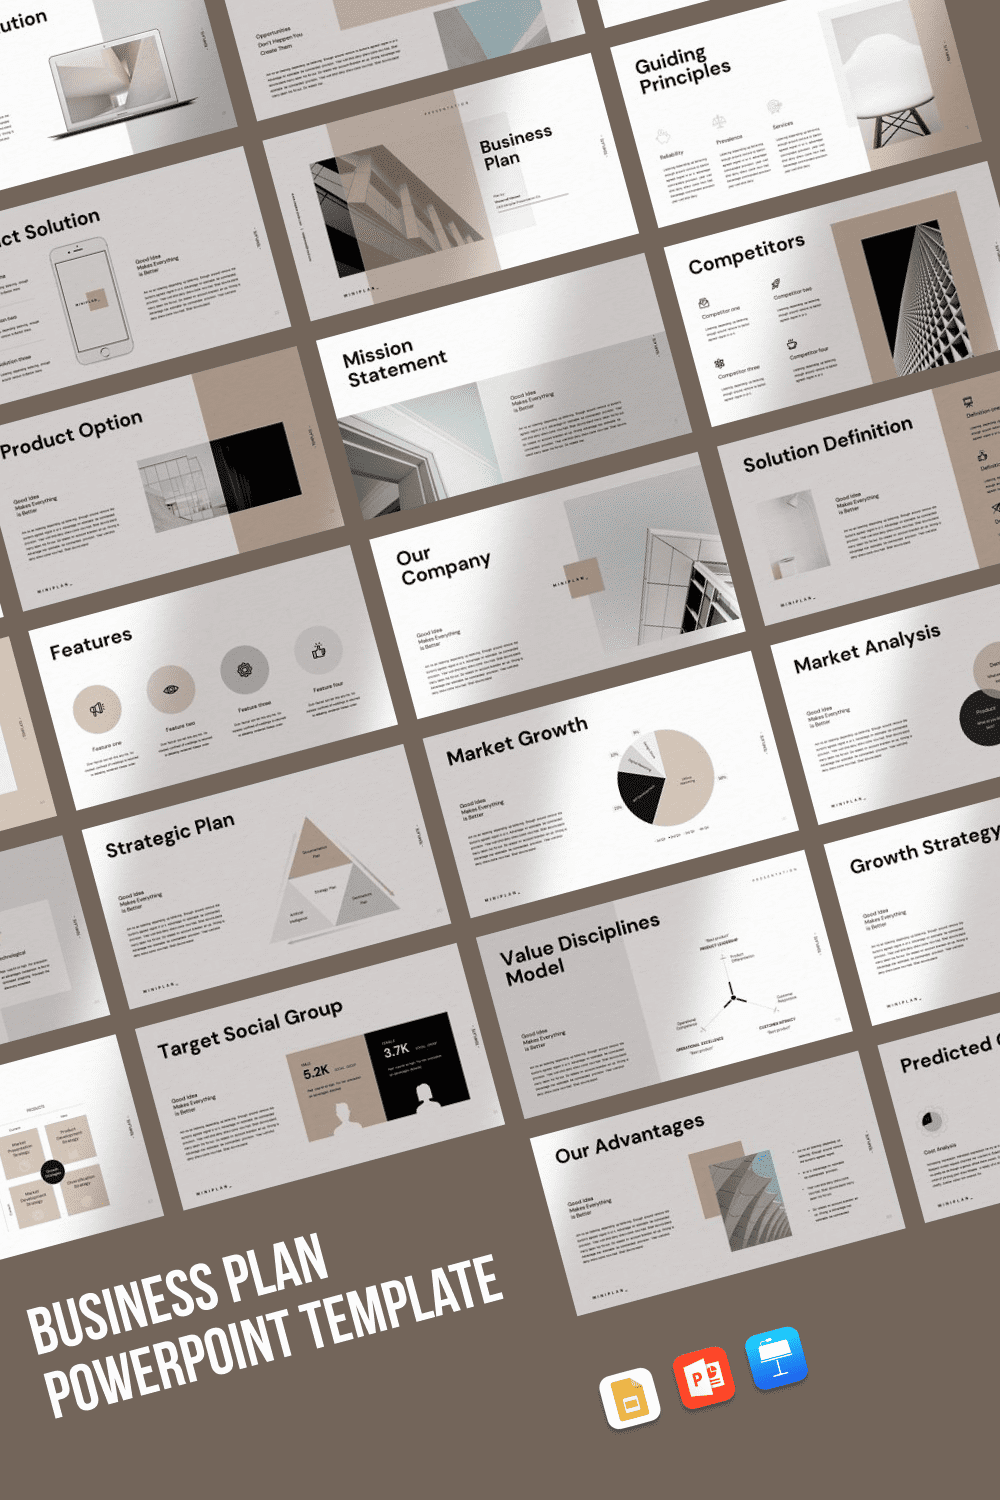 Business Plan PowerPoint Template by MasterBundles Pinterest Collage Image.